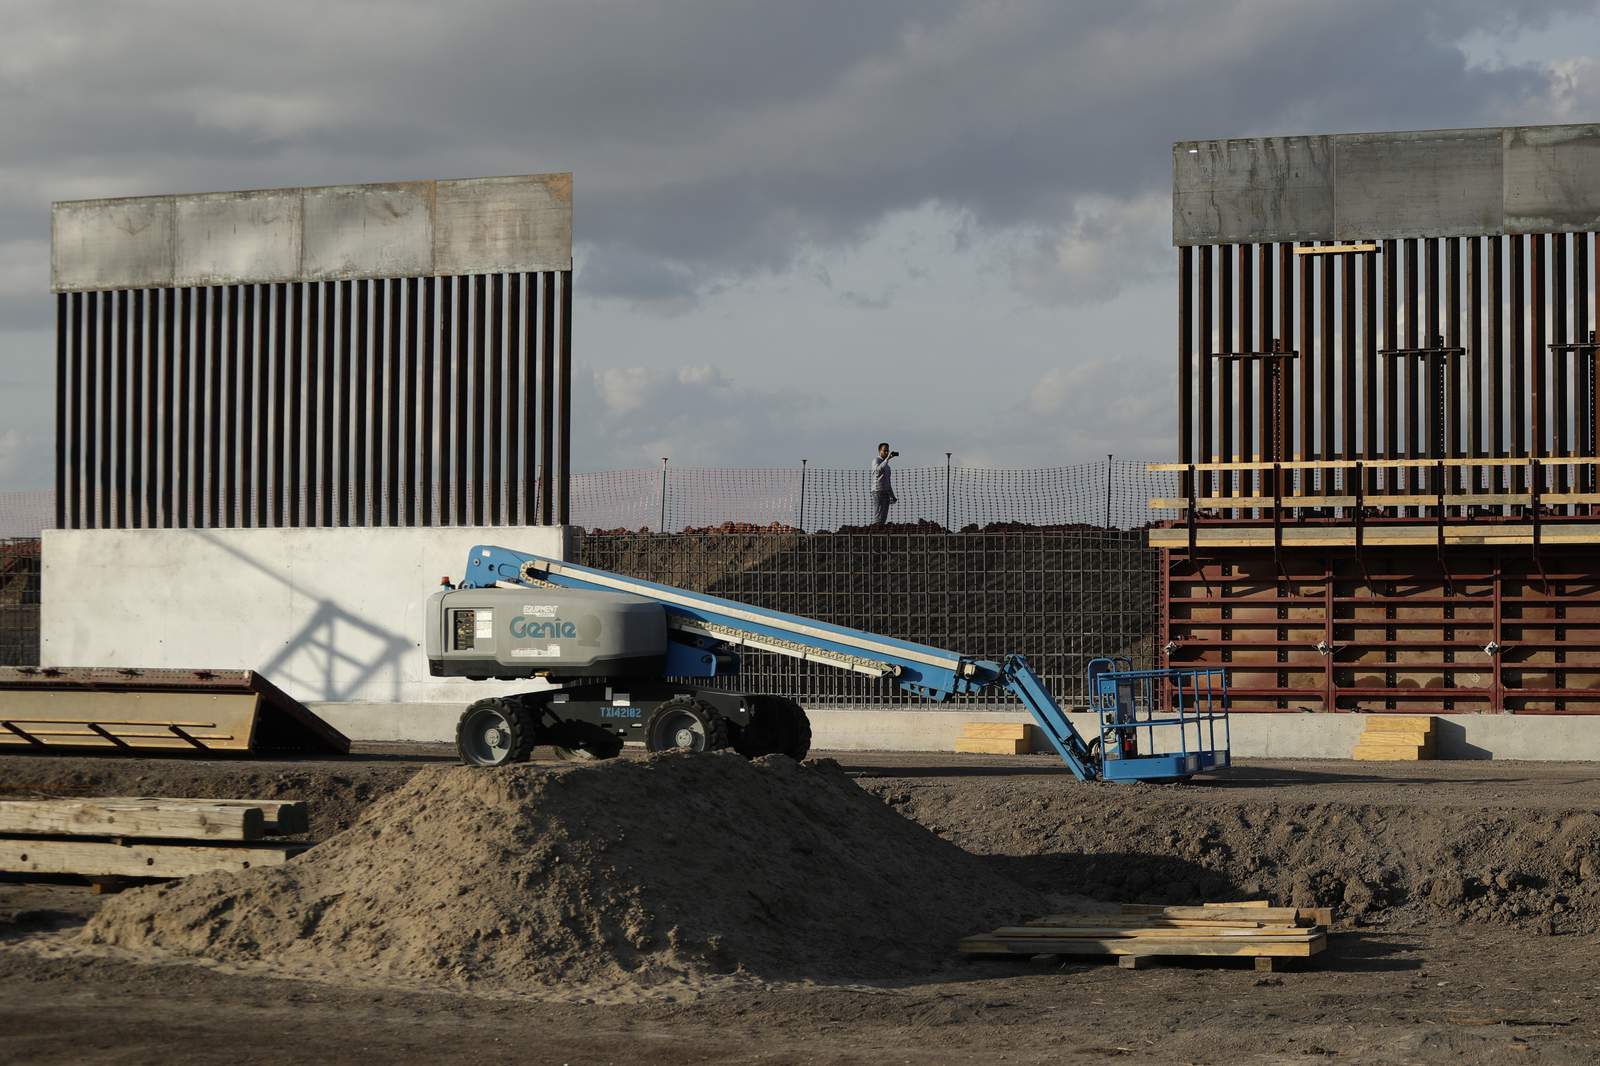 Work on the border wall continues — without social distancing